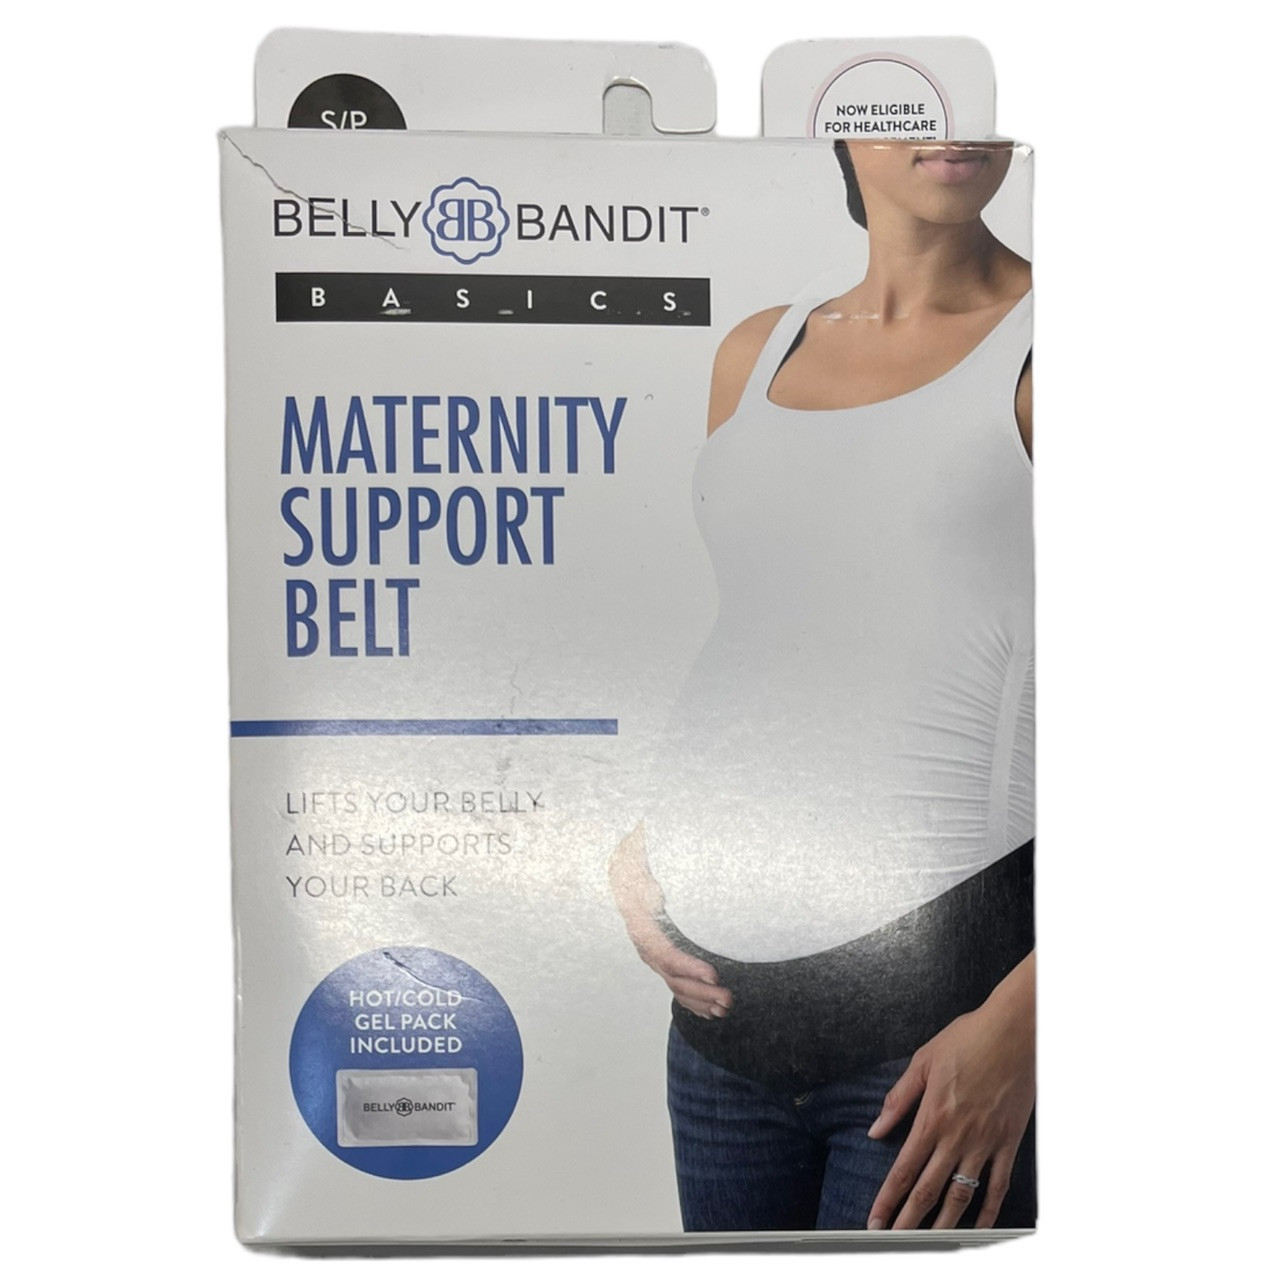 Belly Bandit Maternity Support Belt in Black with Hot Cold Gel Pack |  Gently Used - Size Small